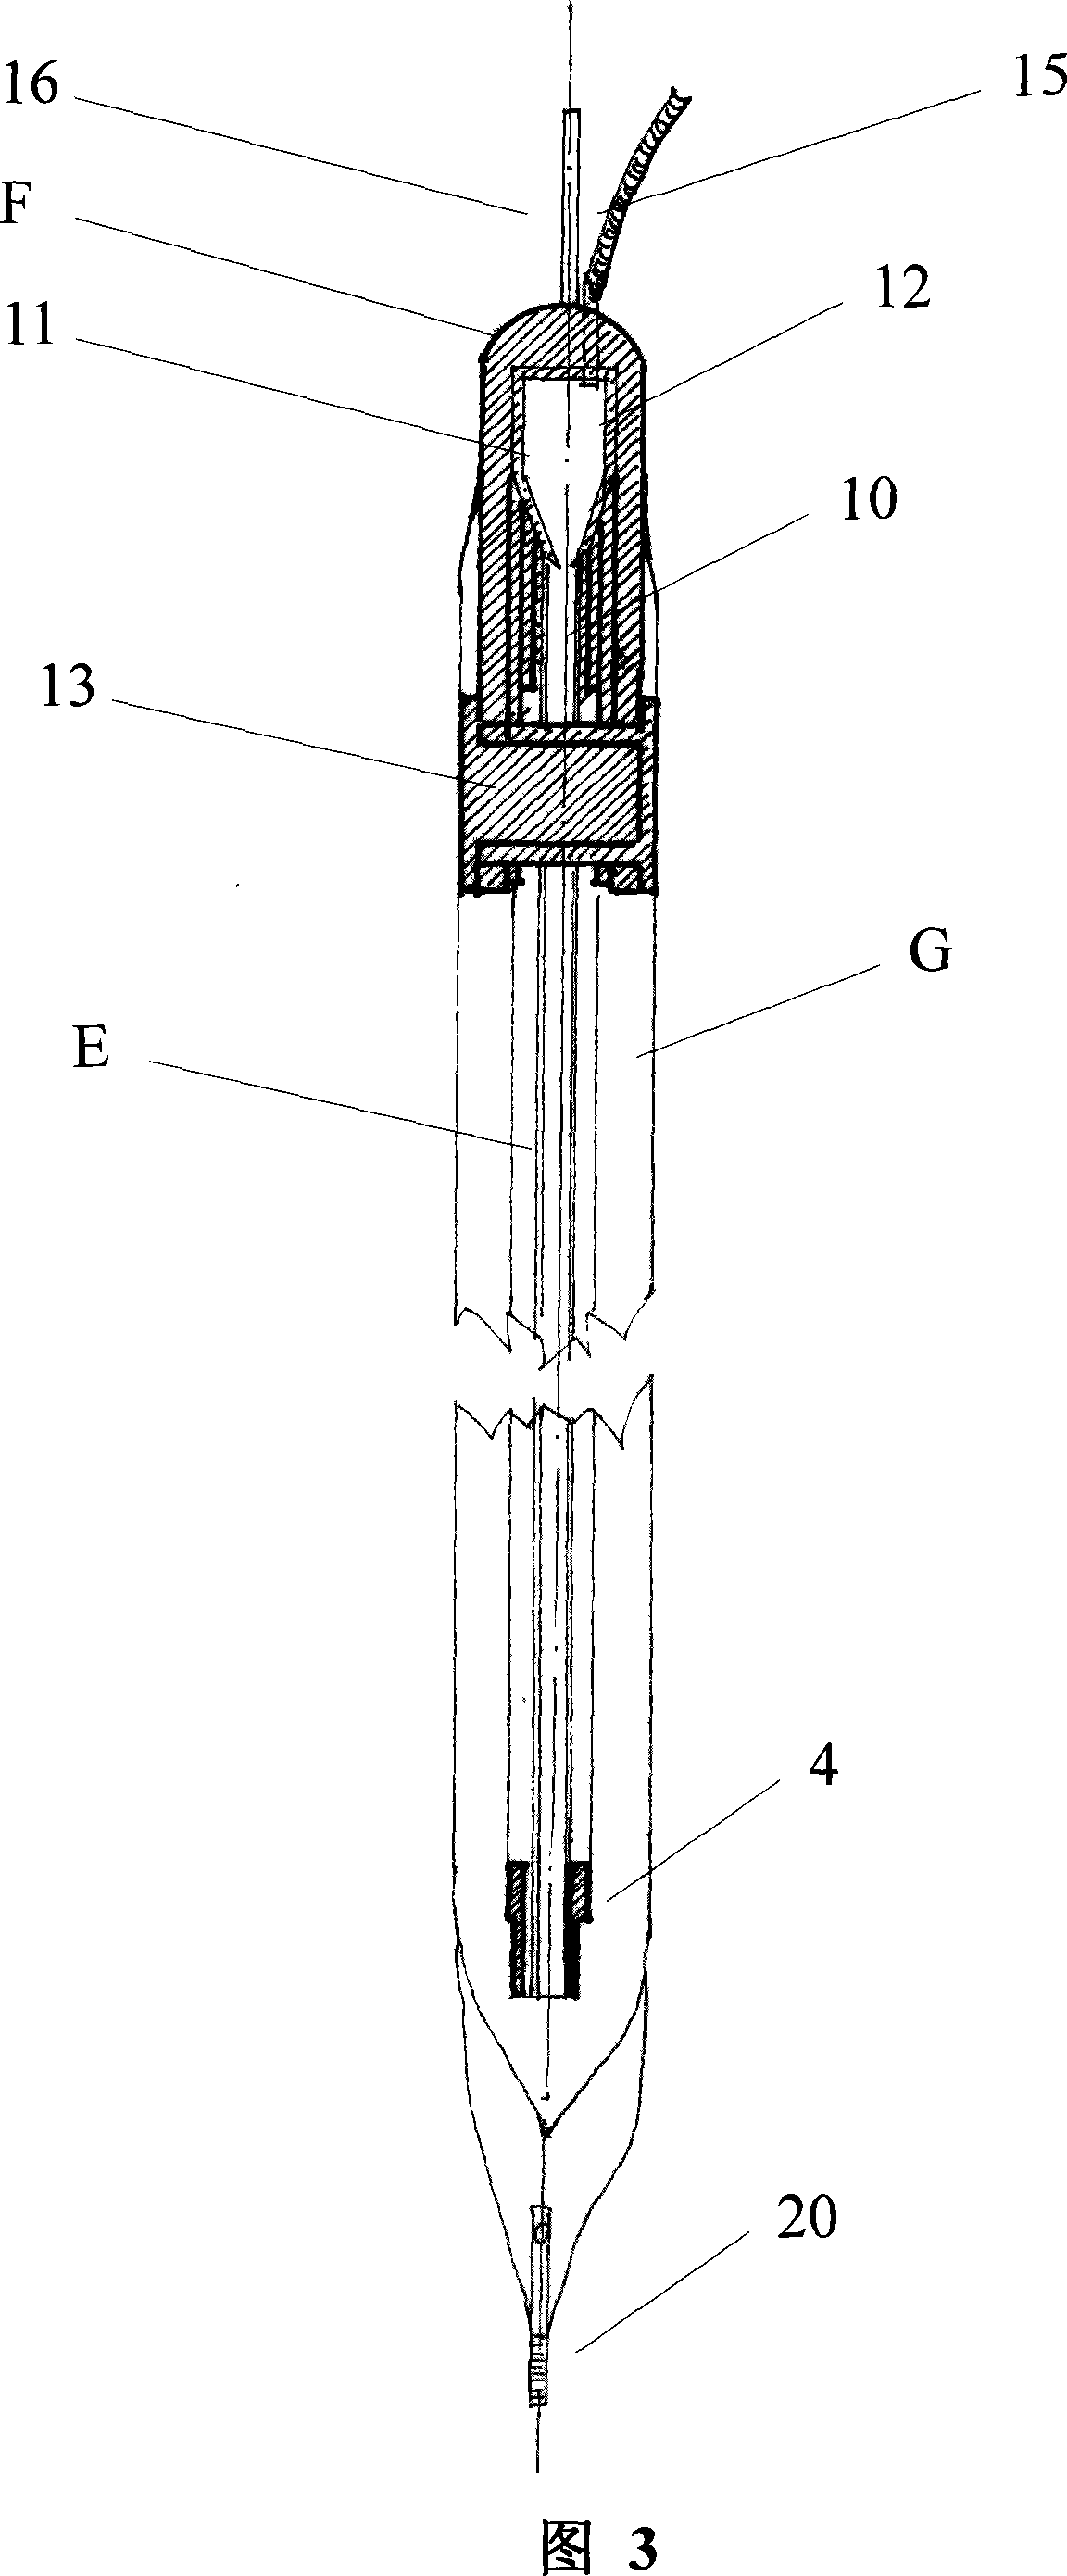 Curtain-shape anchoring culture bioreactor and method for culturing plant cell, tissue or organ using the same